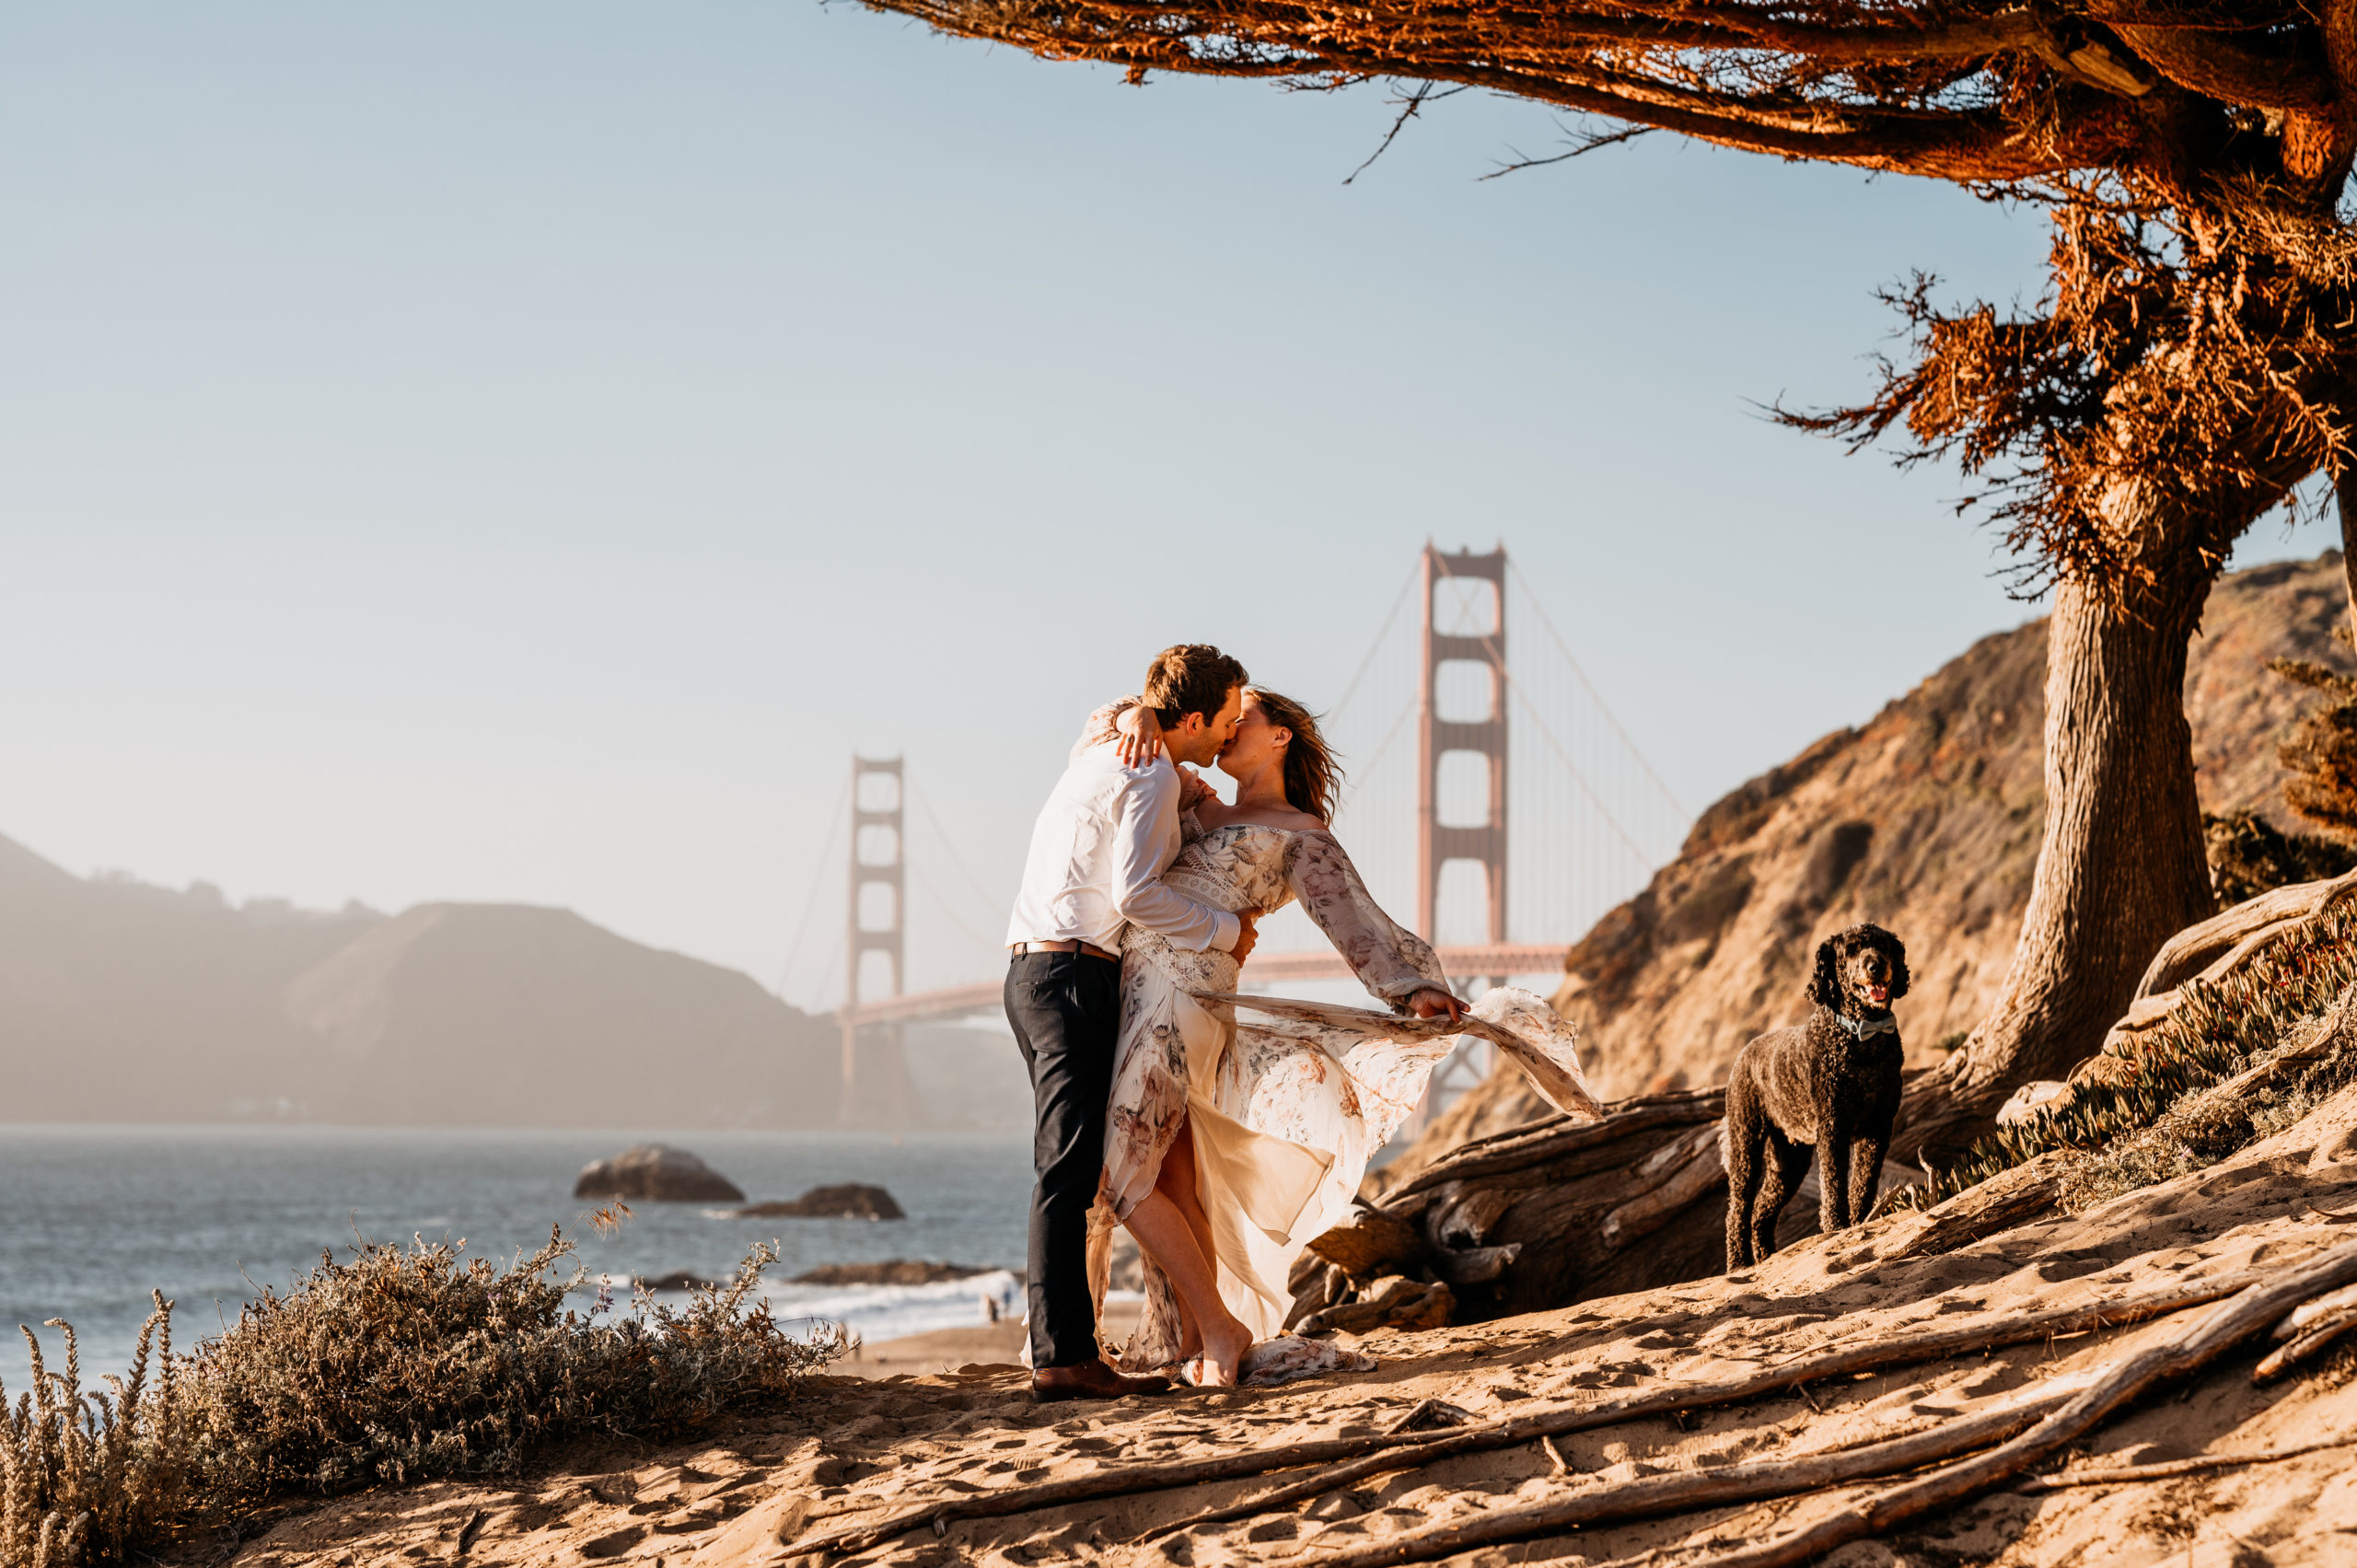 A couple in front of the Golden Gate Bridge in San Francisco celebrating their sunset elopement with their dog.